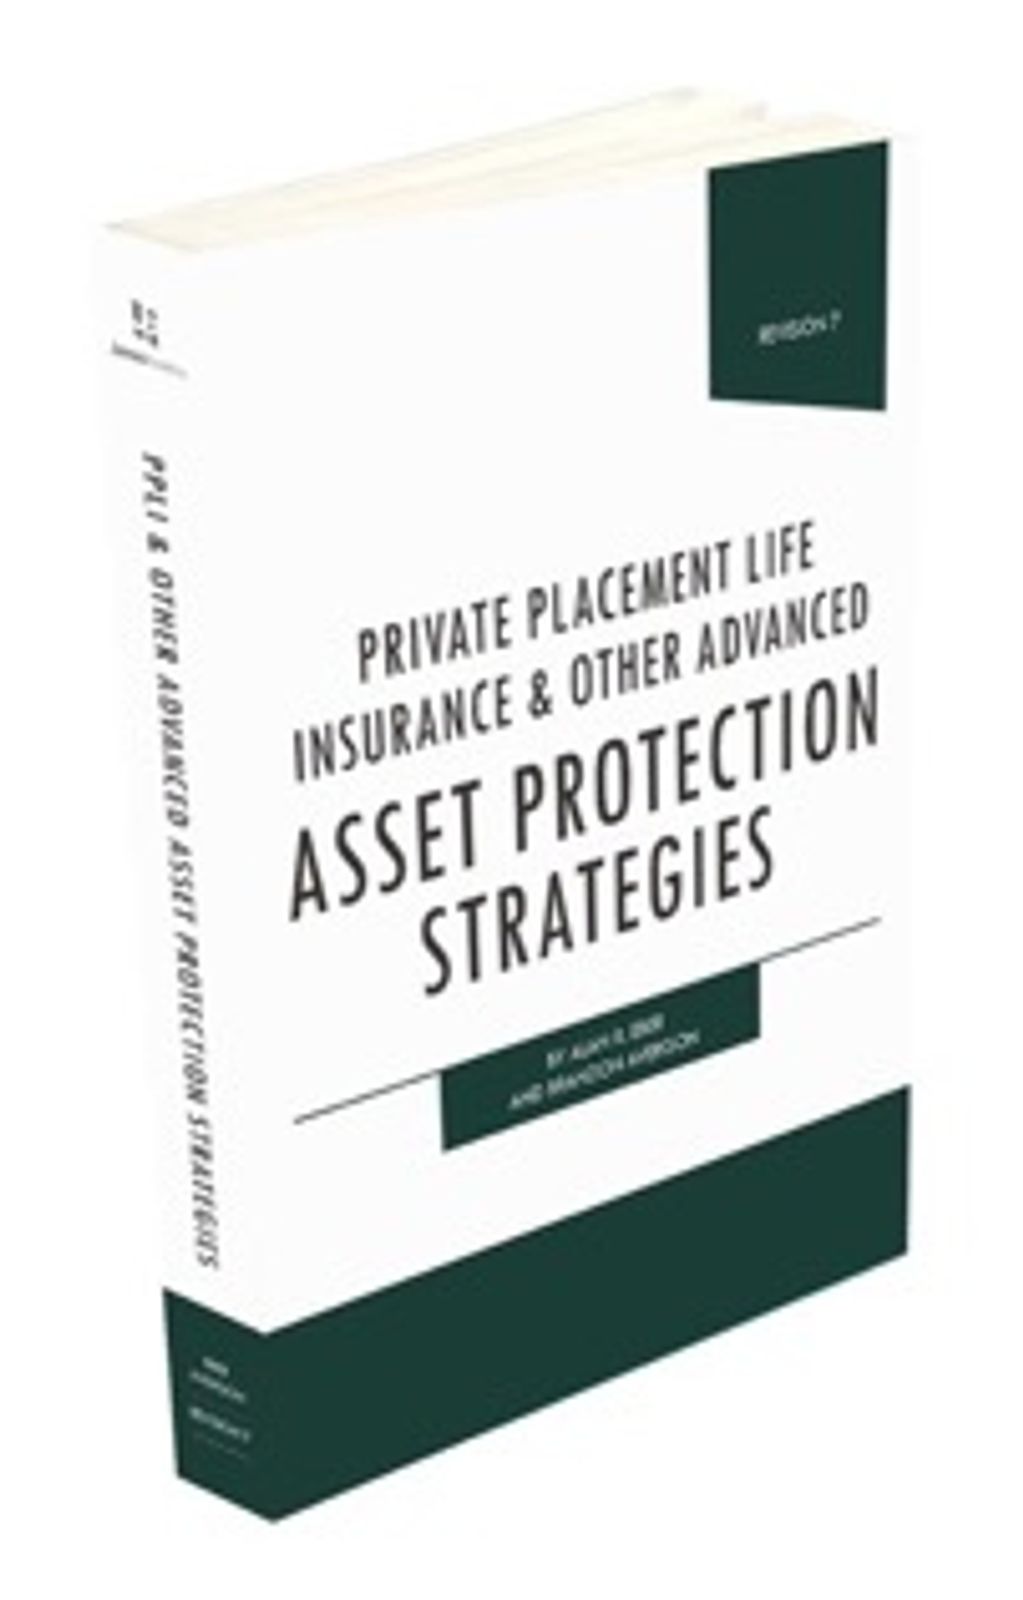 Private Placement Life Insurance & Other Asset Protection Strategies

by Alan Eber & Brandon Avergon